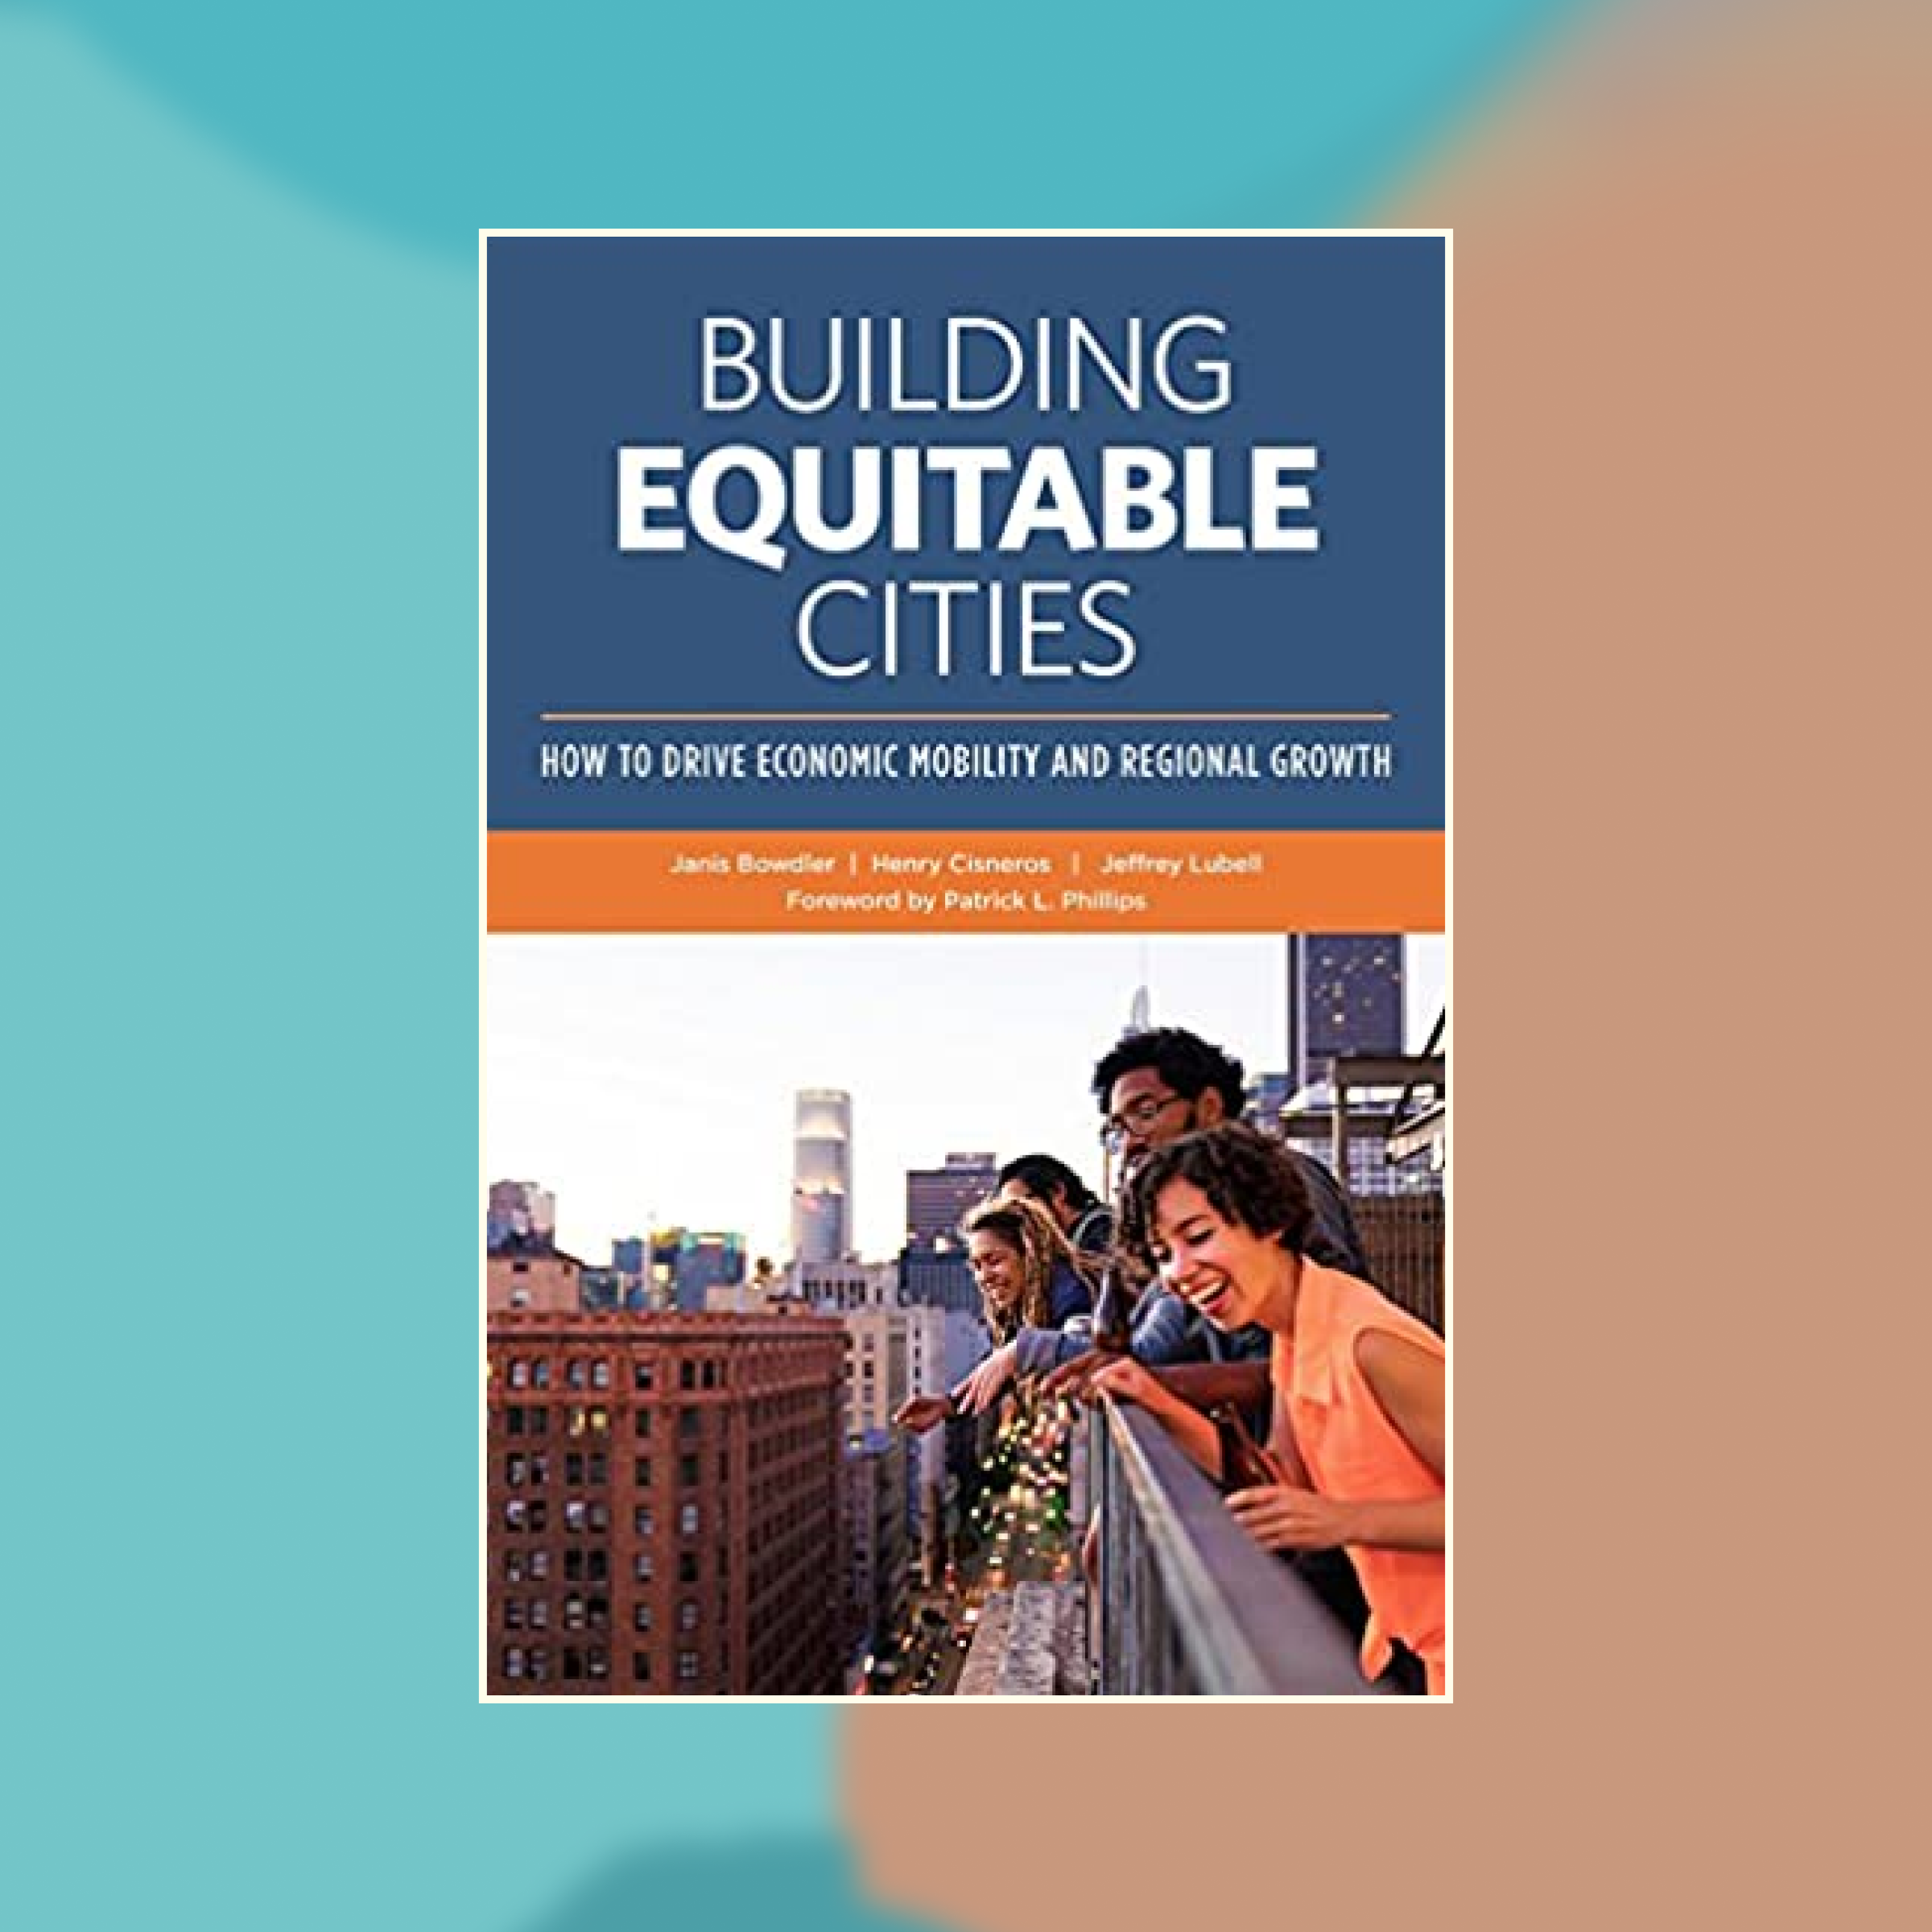 Book cover of Building Equitable Cities against an abstract painted background